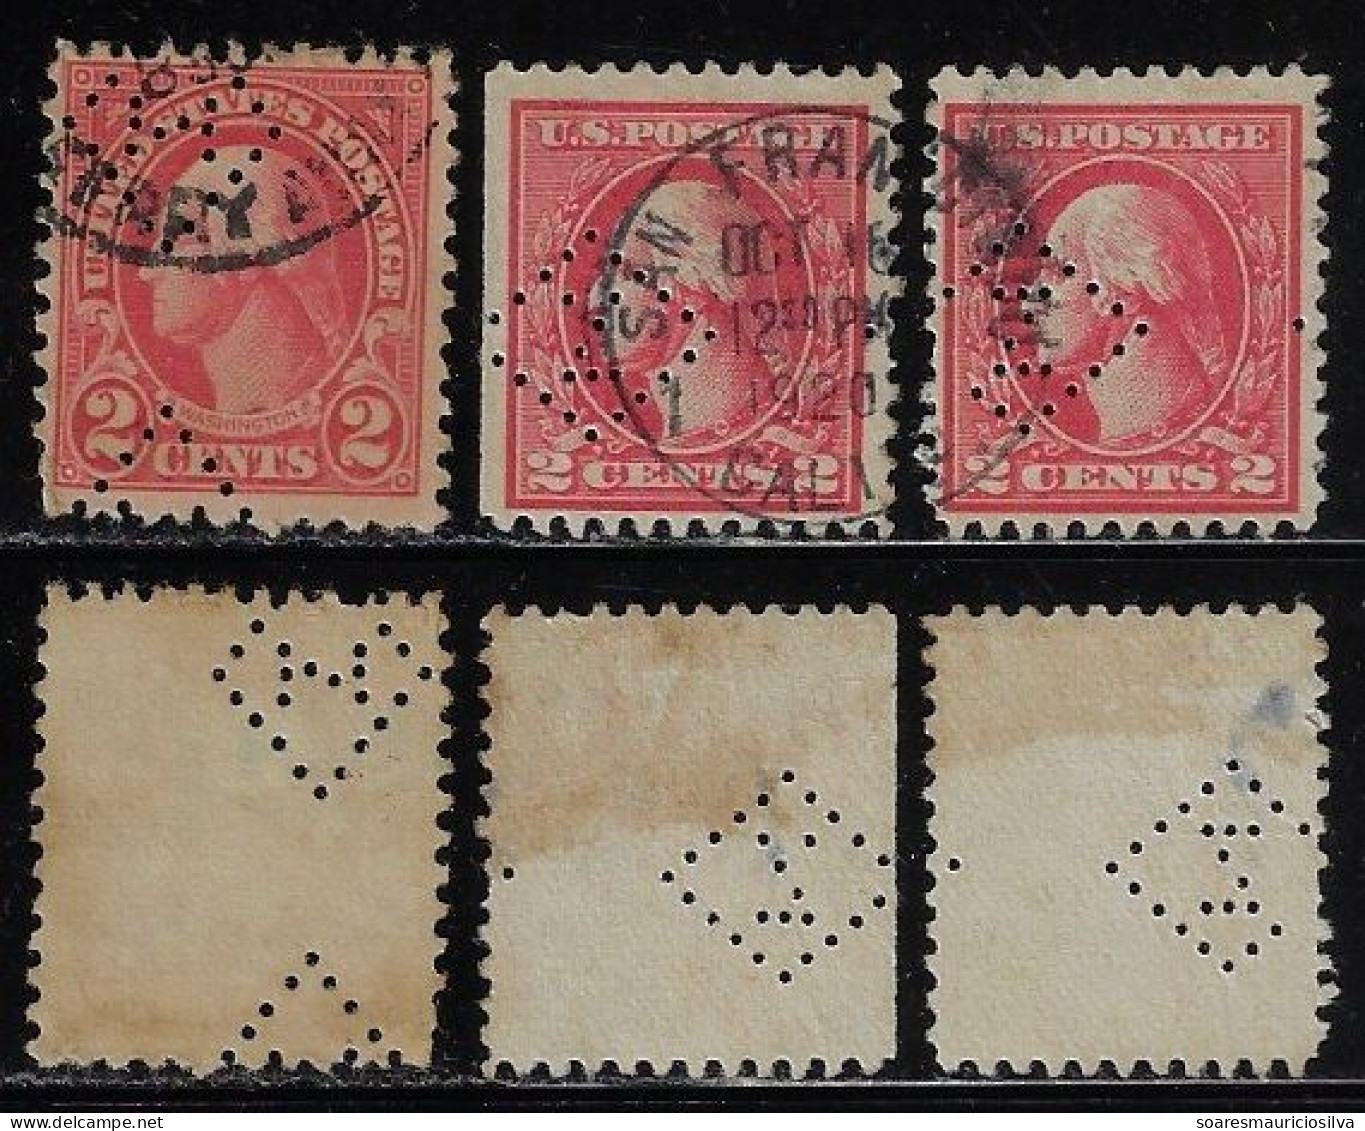 USA United States 1902/1938 3 Stamp Perfin Z (circle) By Zellerbach Paper Company From San Francisco lochung Perfore - Perfin